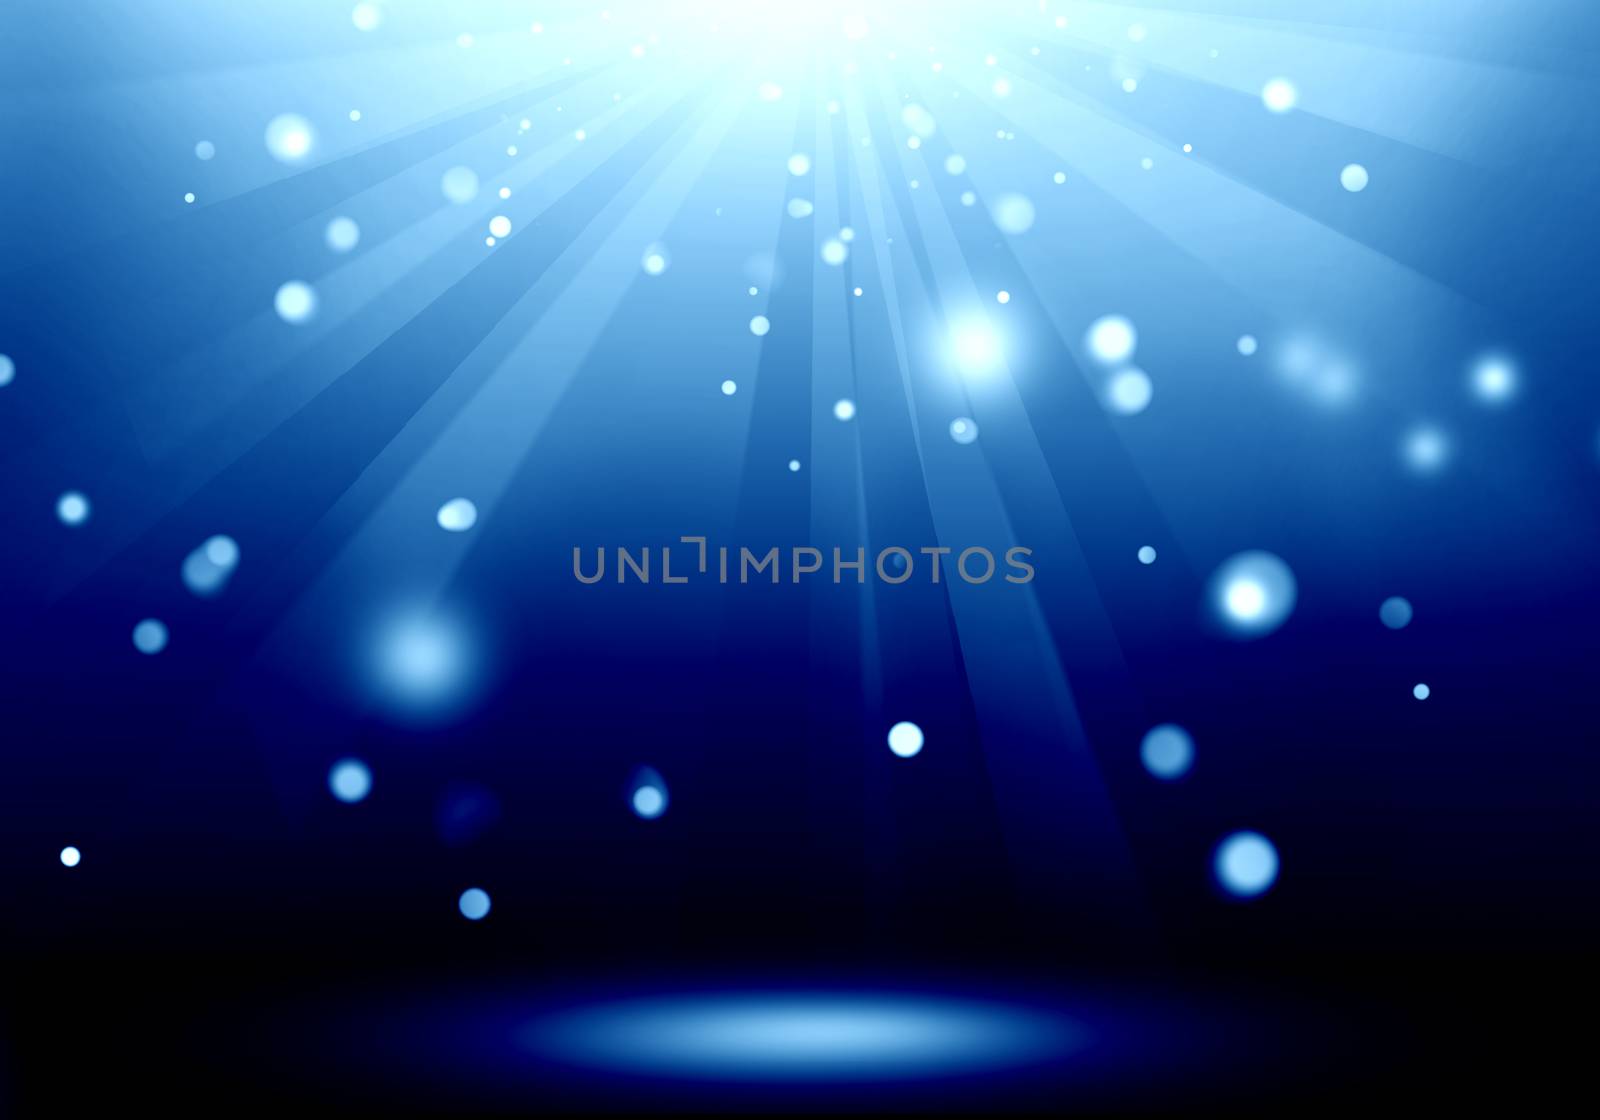 Abstract image of blue lighting flare on the floor stage : Fill  by jayzynism